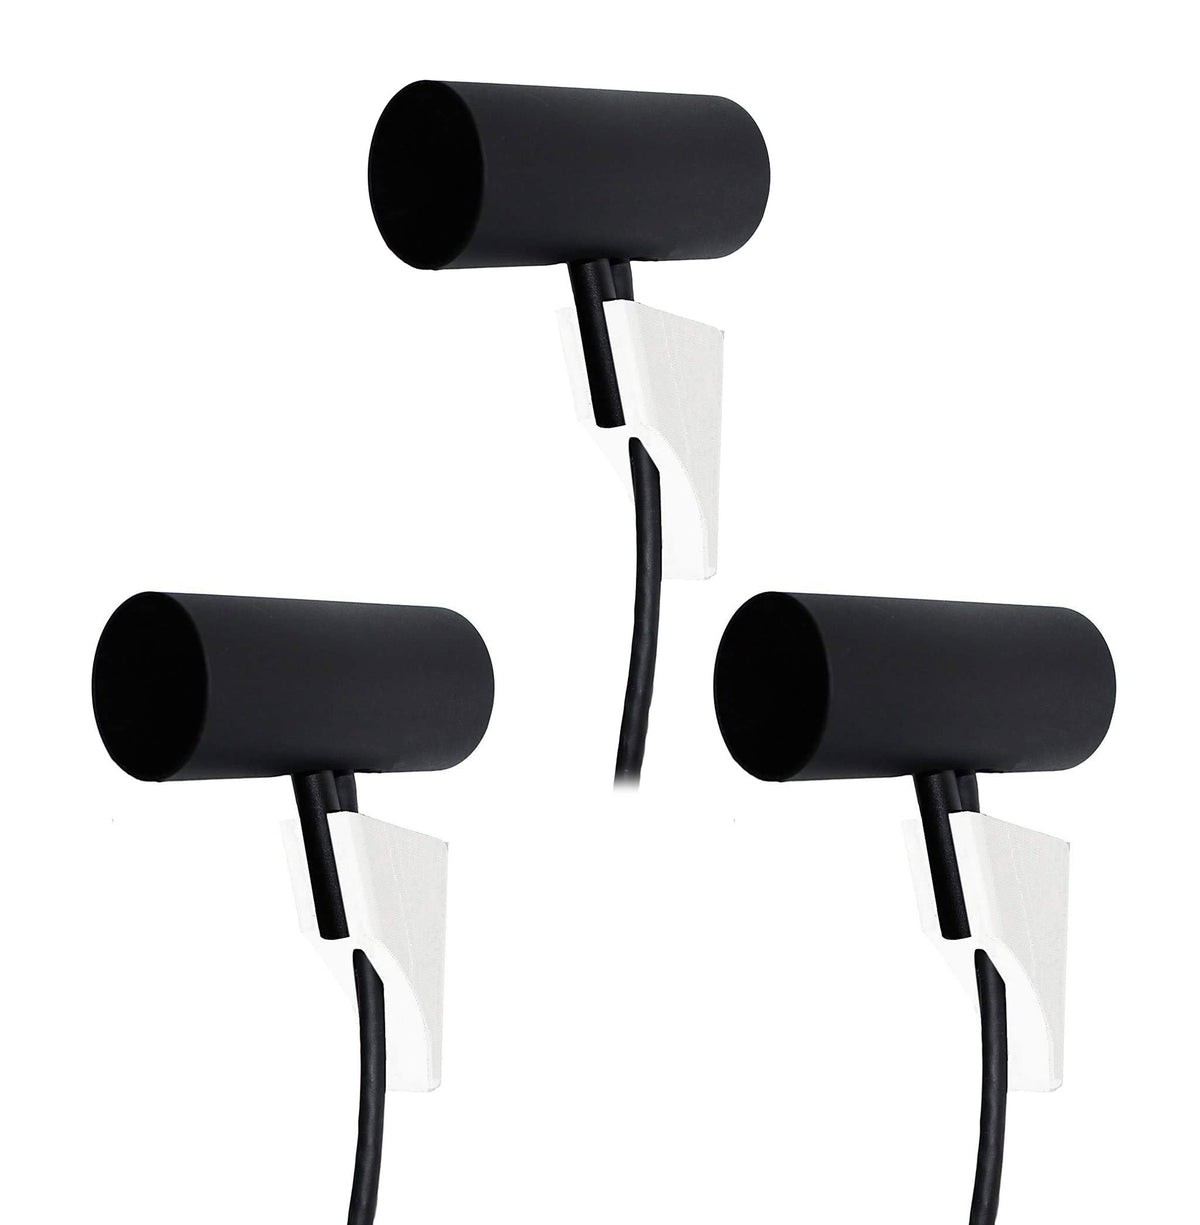 Mounting Accessories compatible with Oculus Rift (White, 3-Pack)